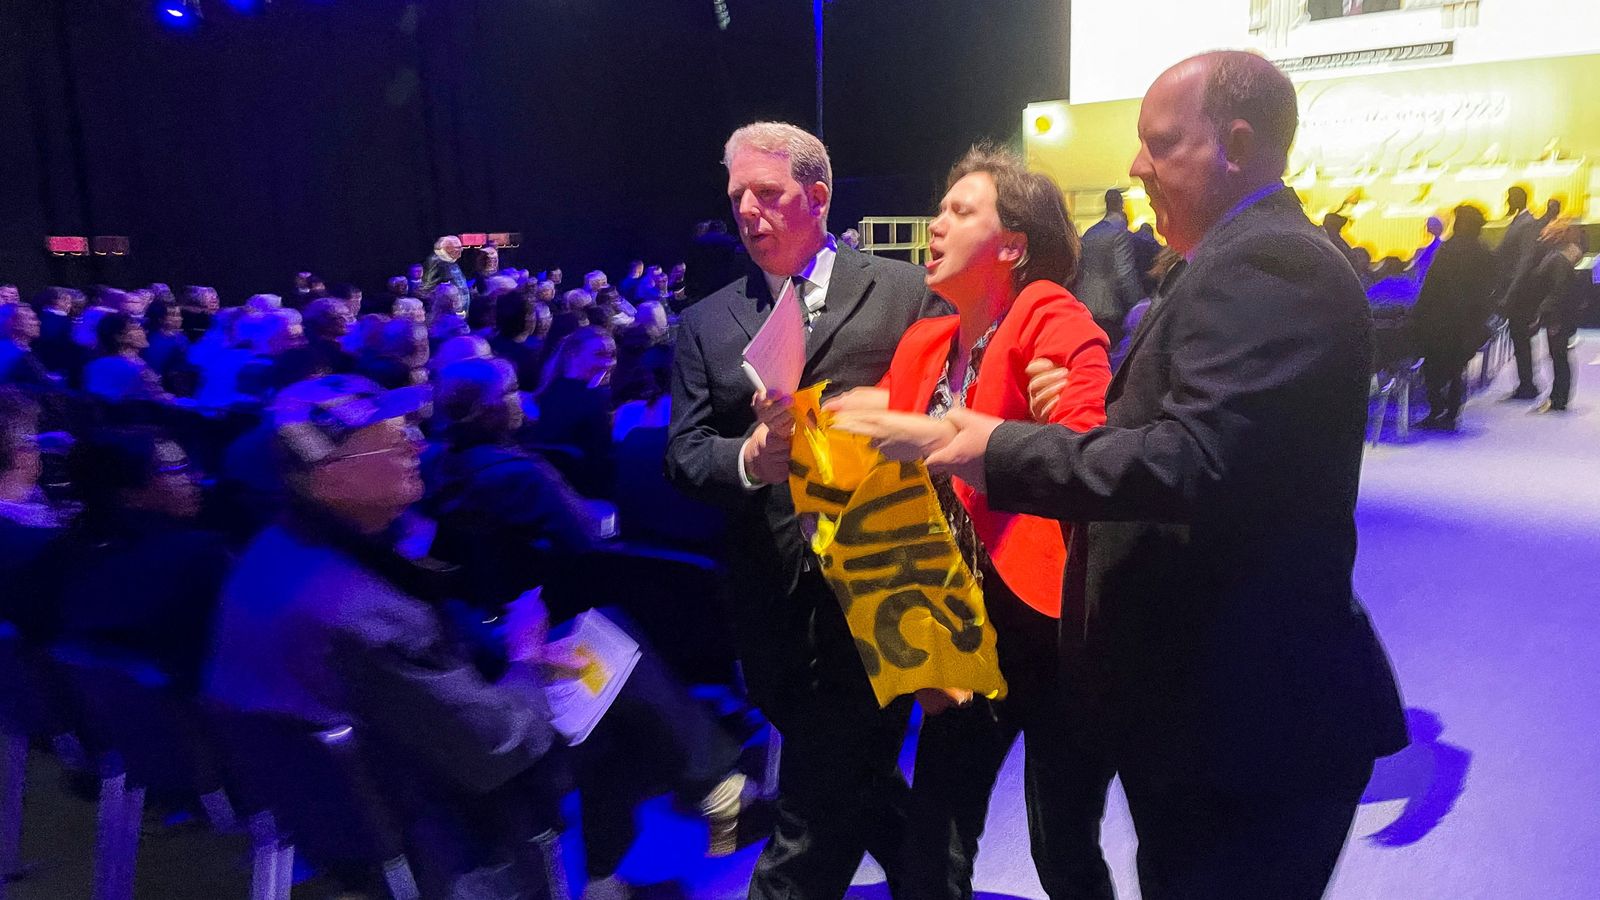 Protesters try to storm stage at Shell AGM